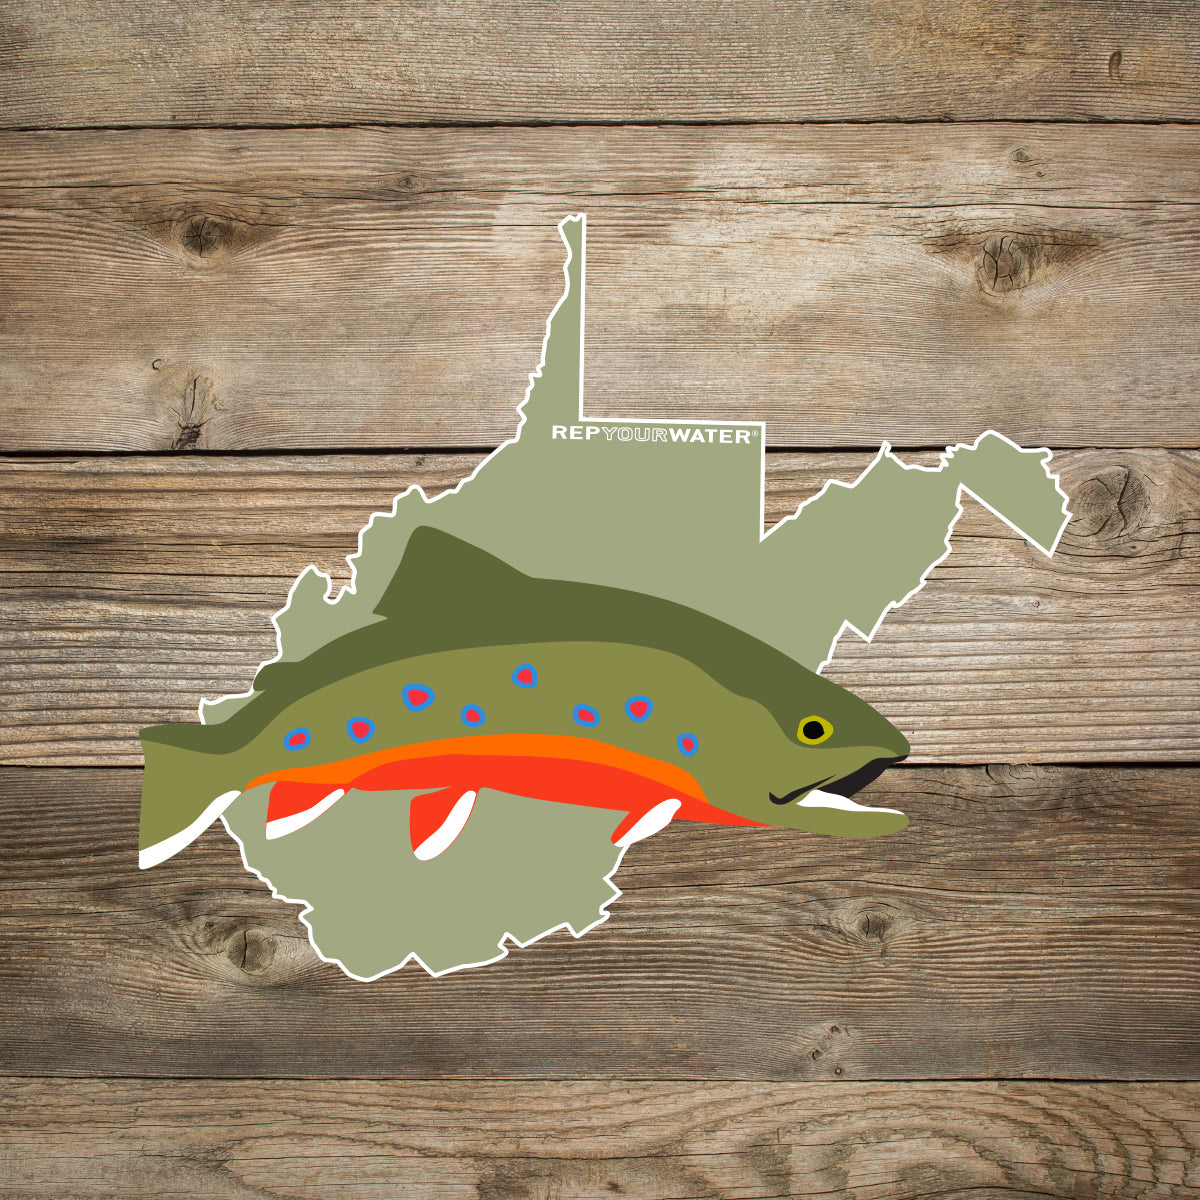 A sticker in the shape of a brook trout on top of west virginia is on a wood background